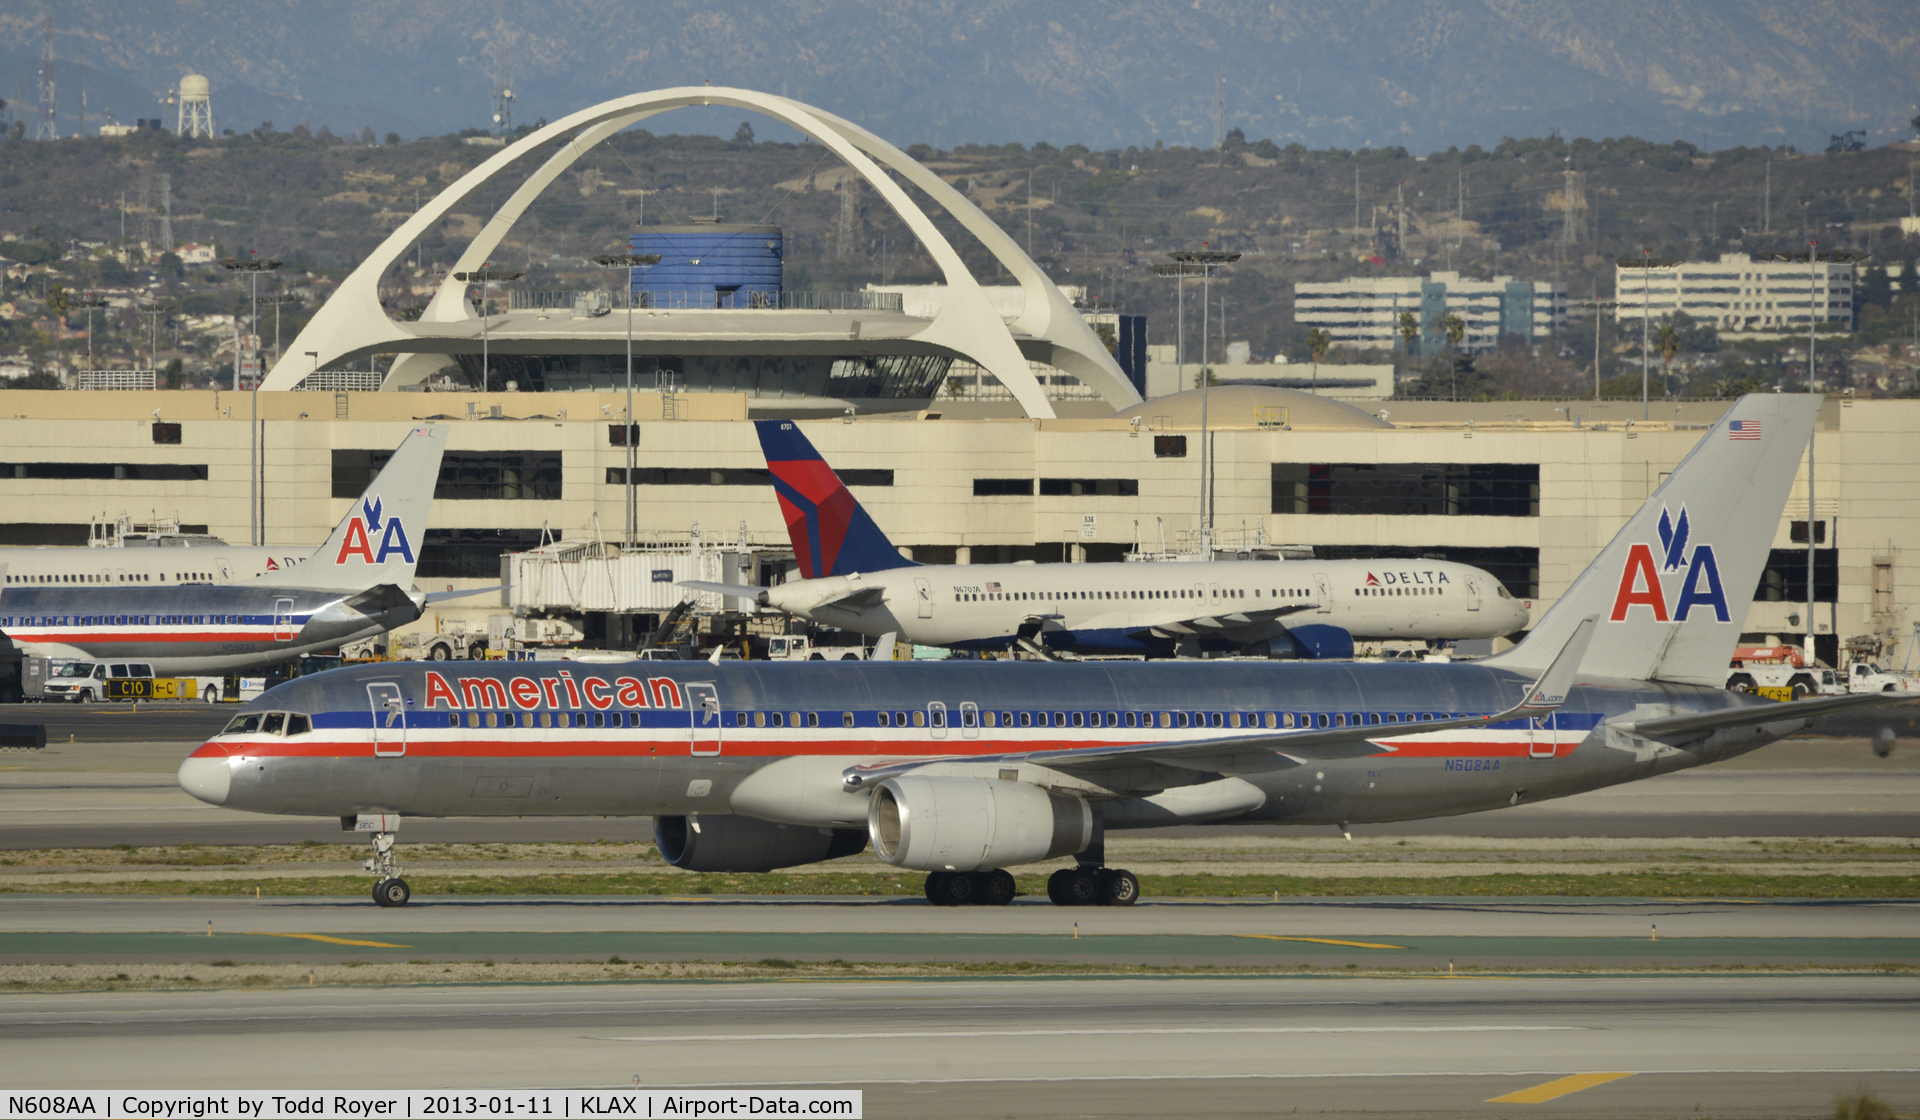 N608AA, 1996 Boeing 757-223 C/N 27446, Arriving at LAX on 25L